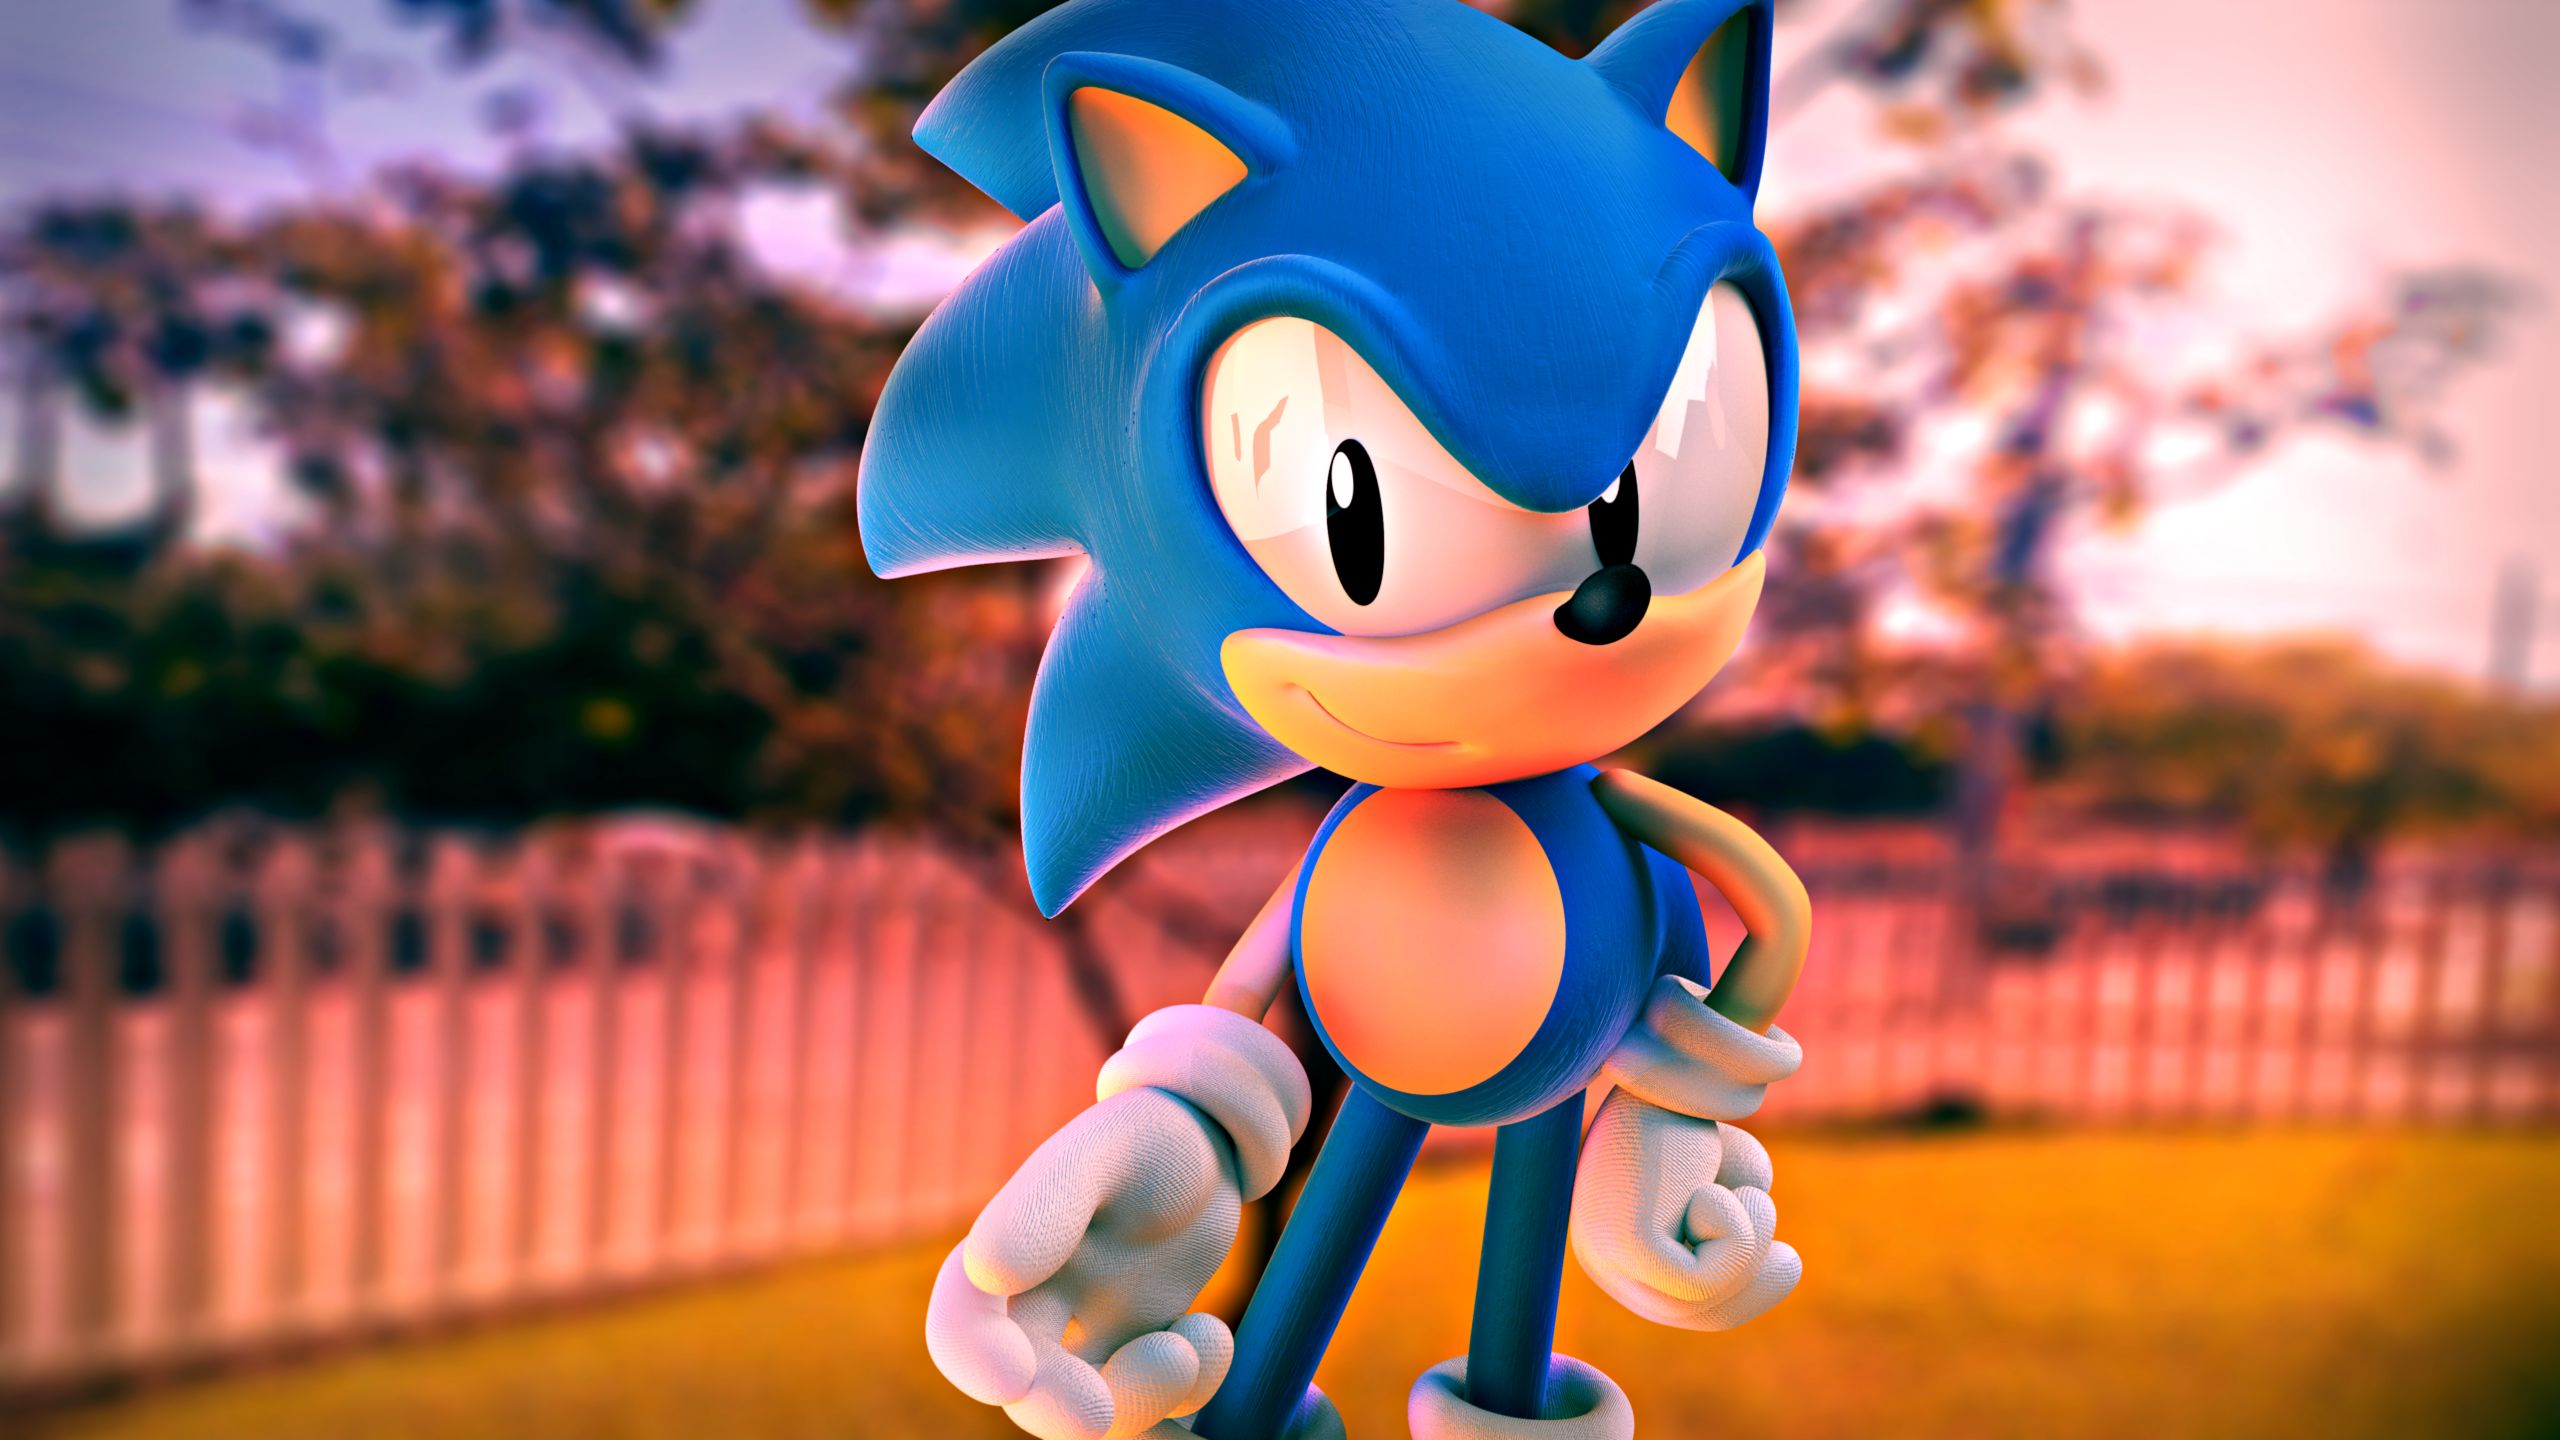 video game, sonic the hedgehog 3, classic sonic, sonic the hedgehog, sonic